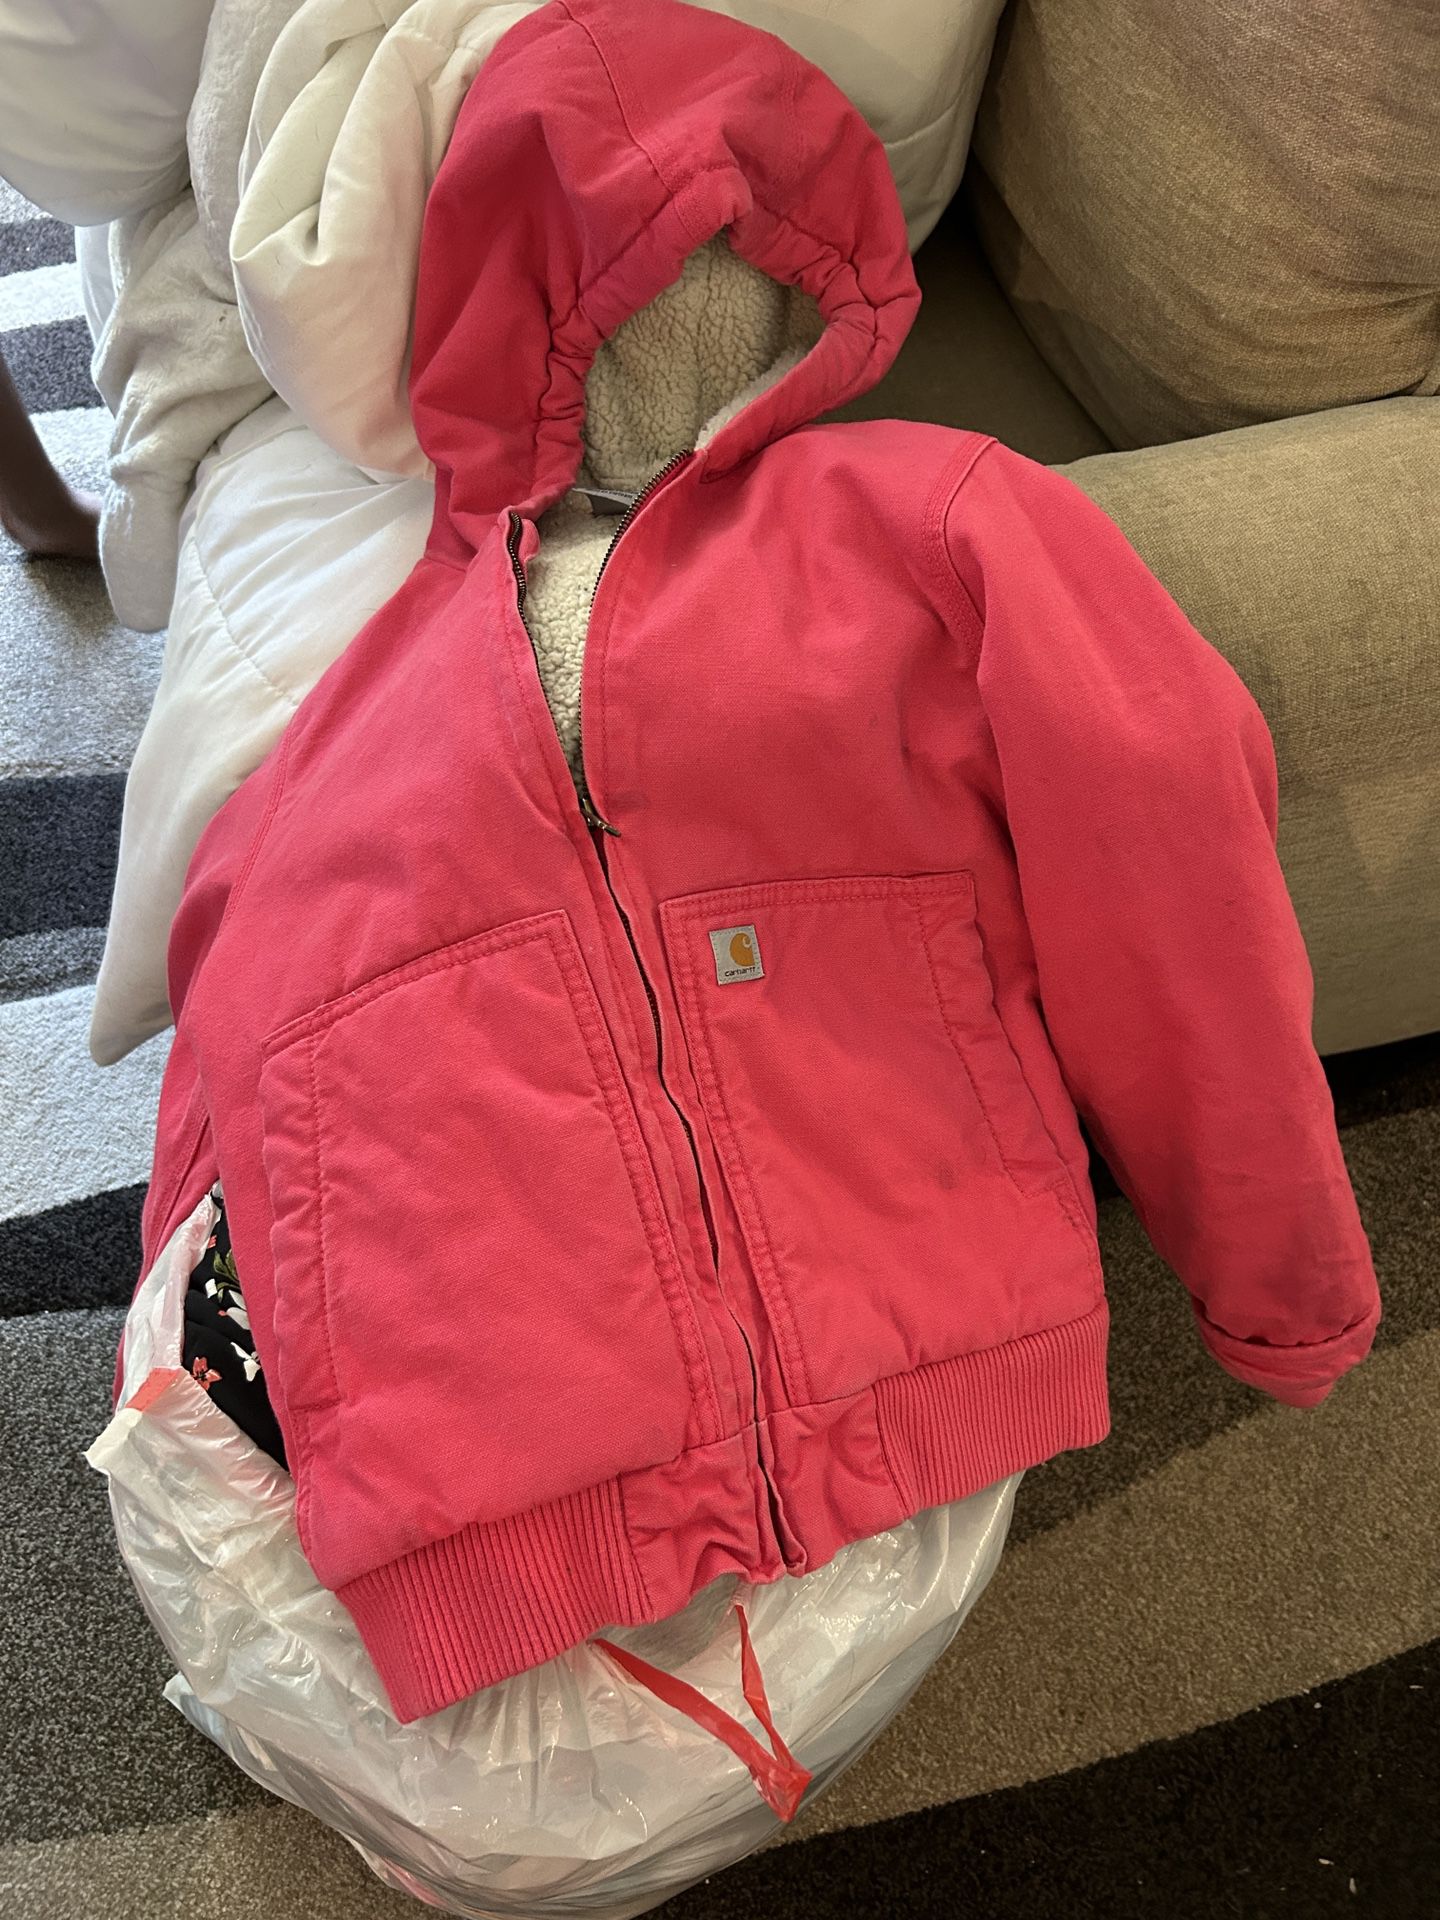 Size 6,7,8 Girl Clothes and carhart Coat